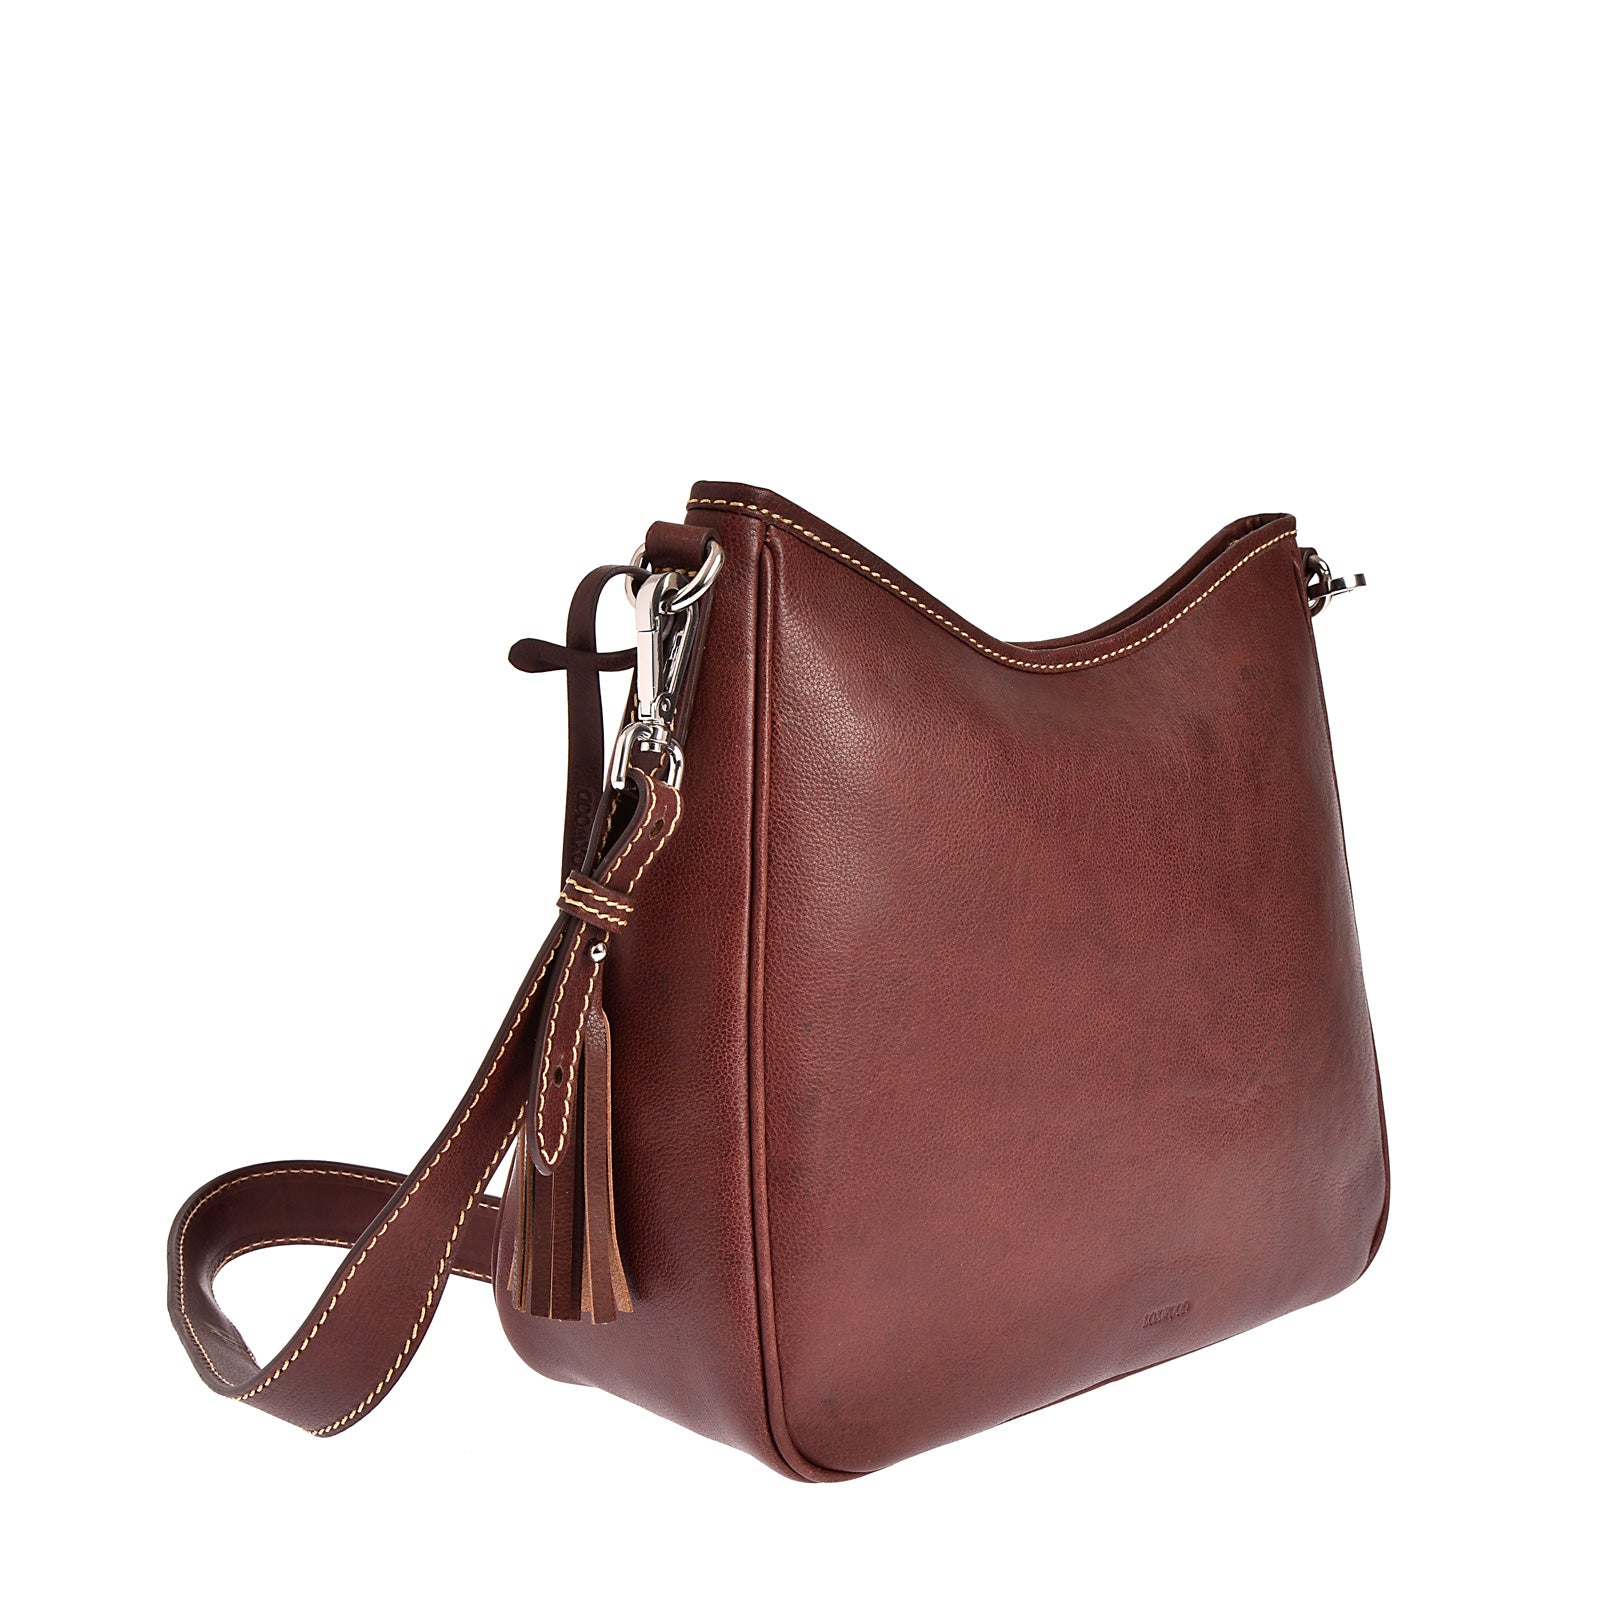 WILLOW - Natural leather bag